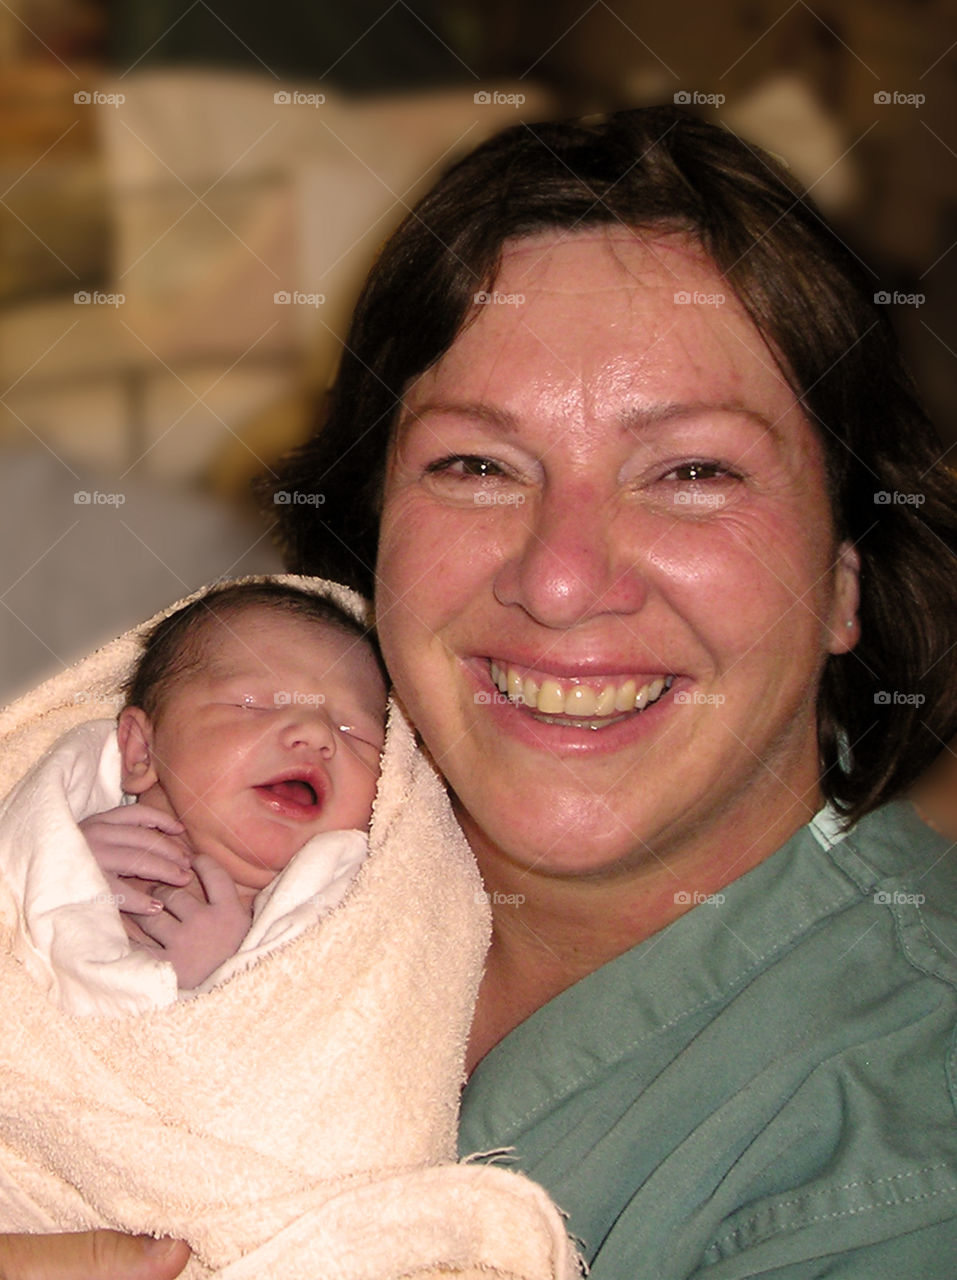  I never gave birth, but I was at my daughters birth & I got to hold her 2 minutes after she was born. I was deliriously happy as can be seen by this face-swallowing smile & the endless tears of joy. This adoptive mom can never be thankful enough. 🙏